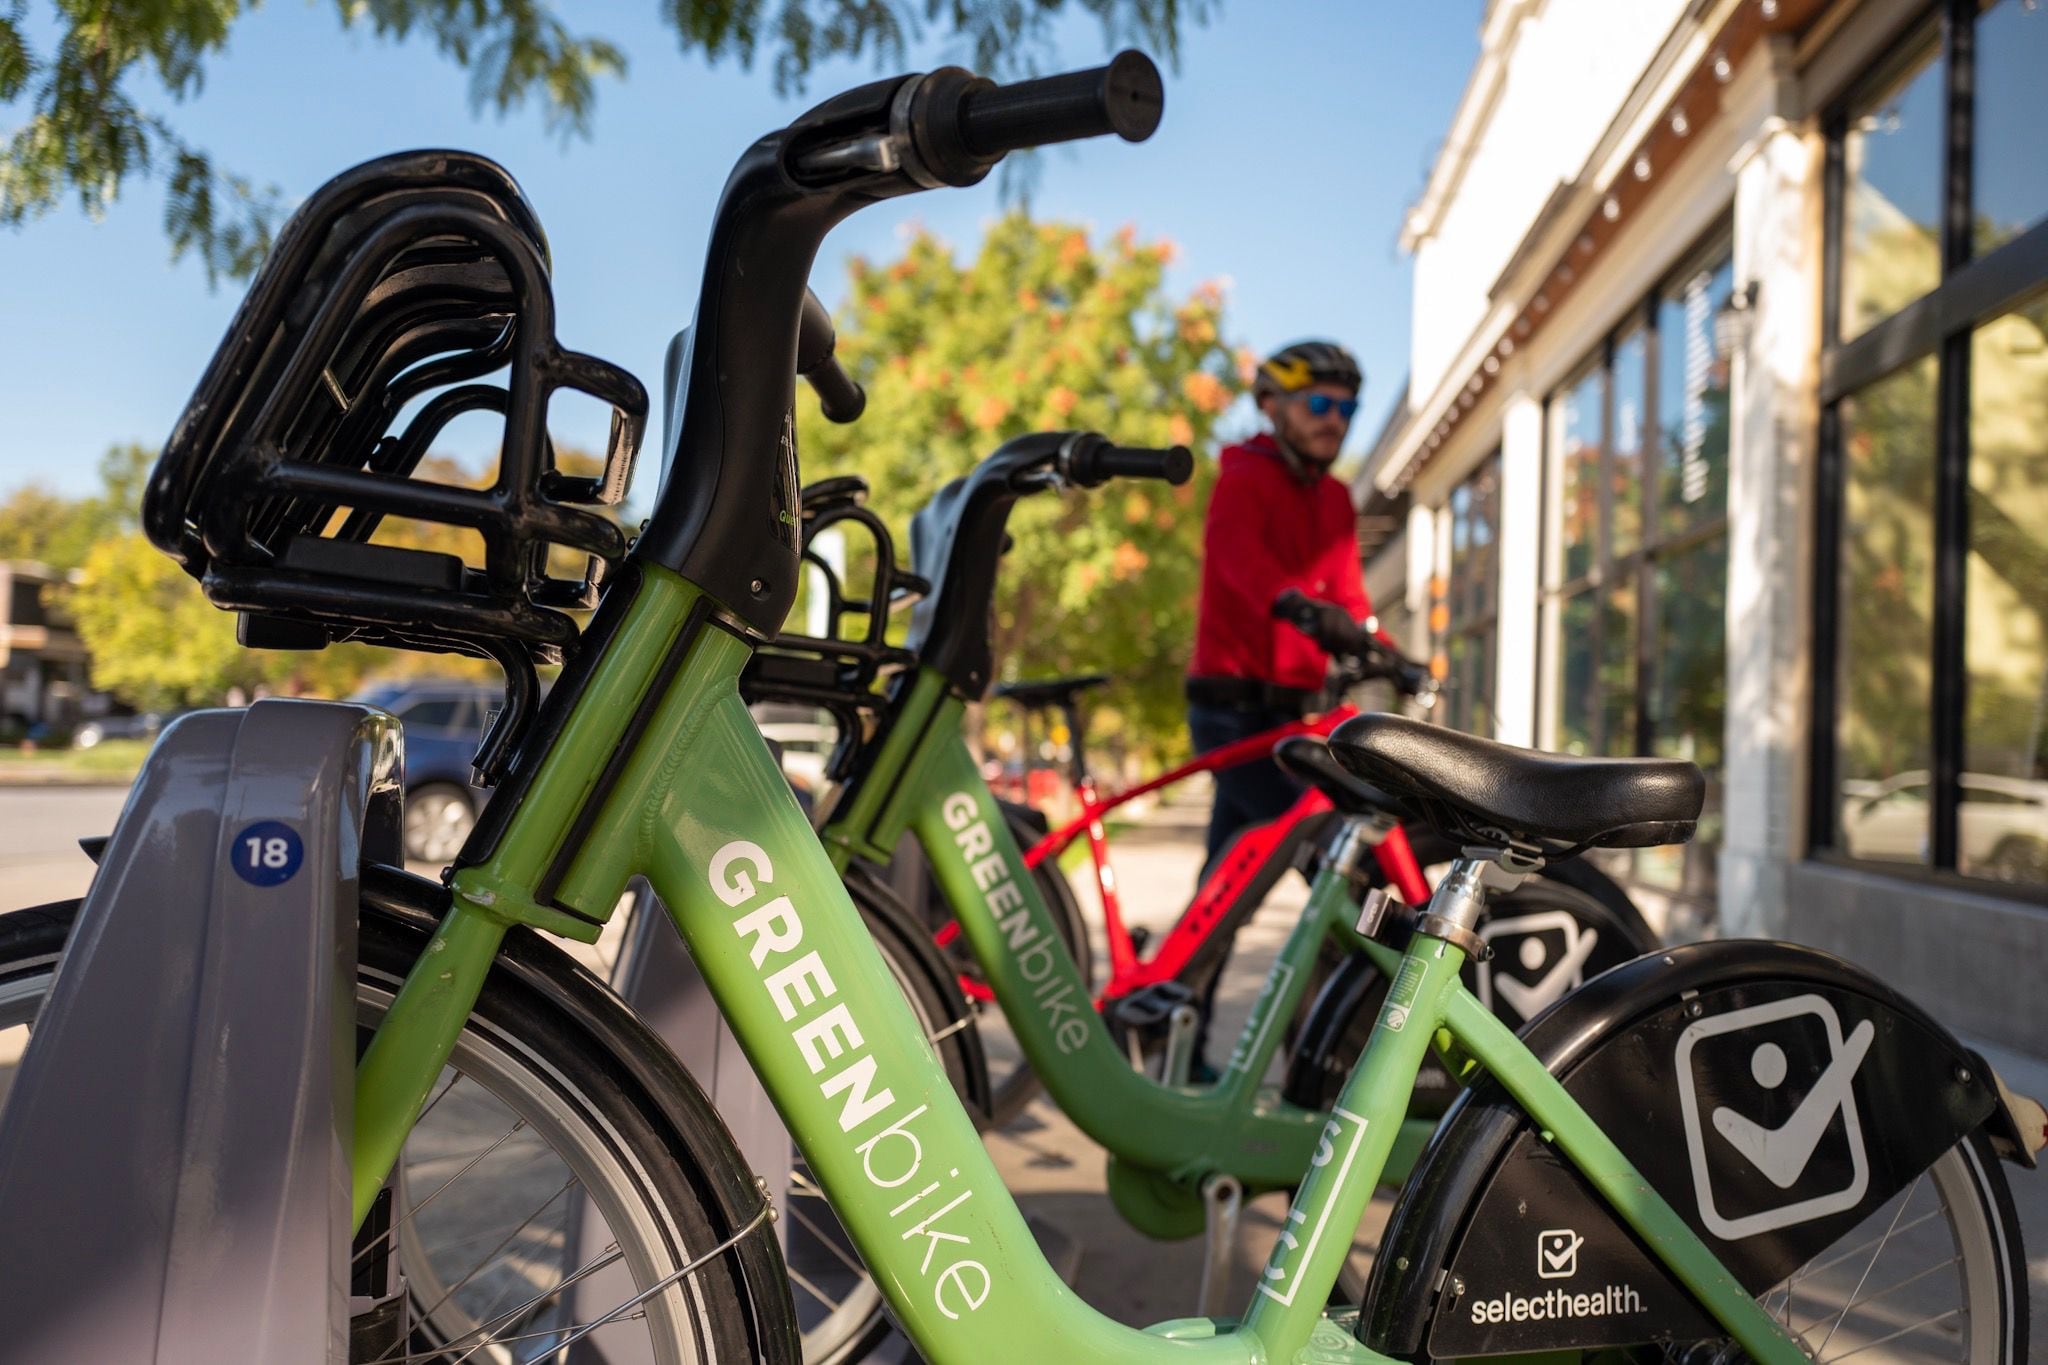 (Trent Nelson | The Salt Lake Tribune)
GREENbikes in racks at 9th and 9th in Salt Lake City in 2019. The rental cycles saw a drop in ridership between 2021 and 2022 but recovered in 2023.